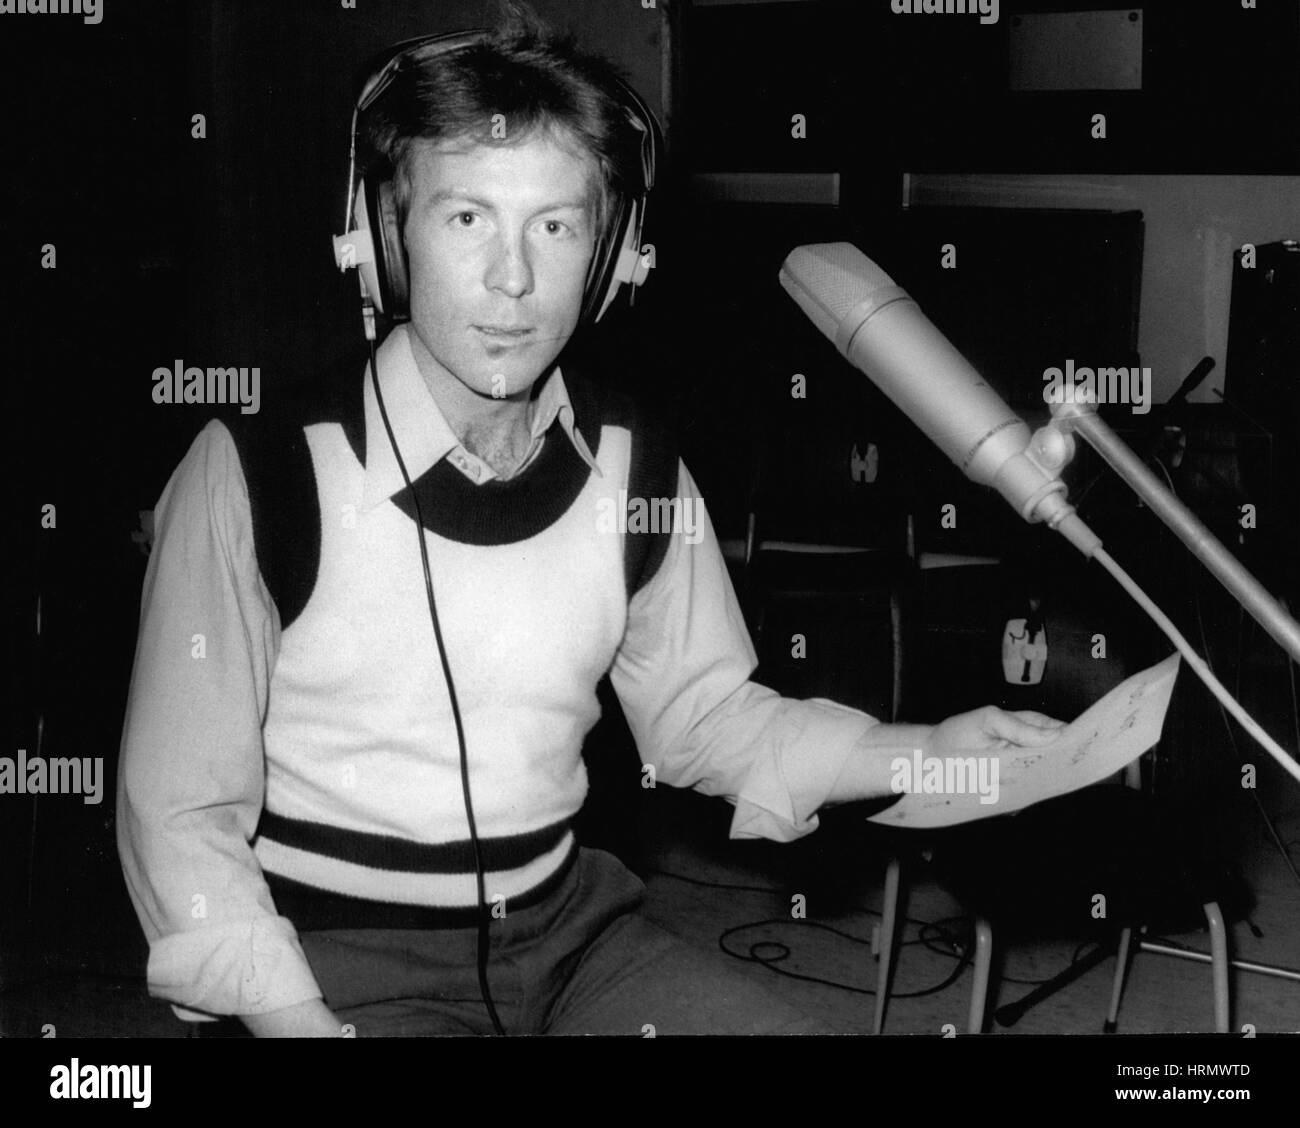 Feb. 02, 1978 - Roddy Llewellyn Turns to 'Pop' Roddy Llewellyn, 30, Princess Margaret's Boyfriend, had his first day in a recording studio in the first step to becoming a 'pop' star, he was making a demonstration disc at the Air Studios, Oxford Street. Claude Wolff, the husband manager of Petula Clark, has signed up Roddy, who said that he has a marvelous voice, and cannot fail. Later he will accompany Petula on a French television show. Photo Shows: Roddy Llewellyn seen during the making of a demonstration disc at the Air Studios, Oxford Street today. (Credit Image: © Keystone Press Agency/Ke Stock Photo